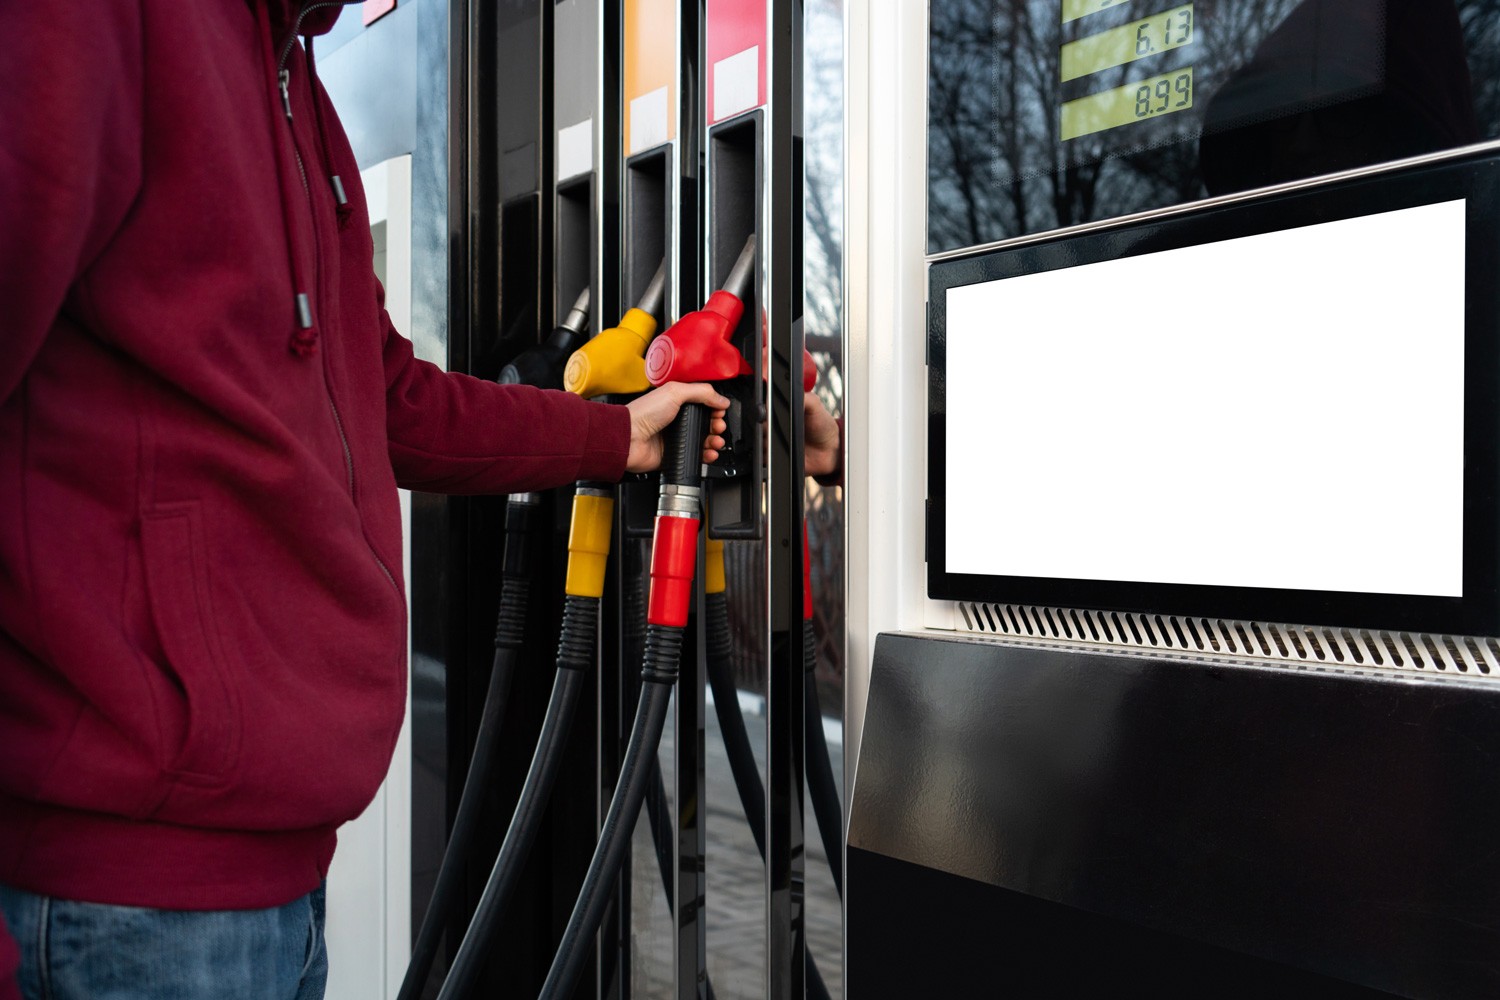 Self-service filling station. A man using a touchscreen